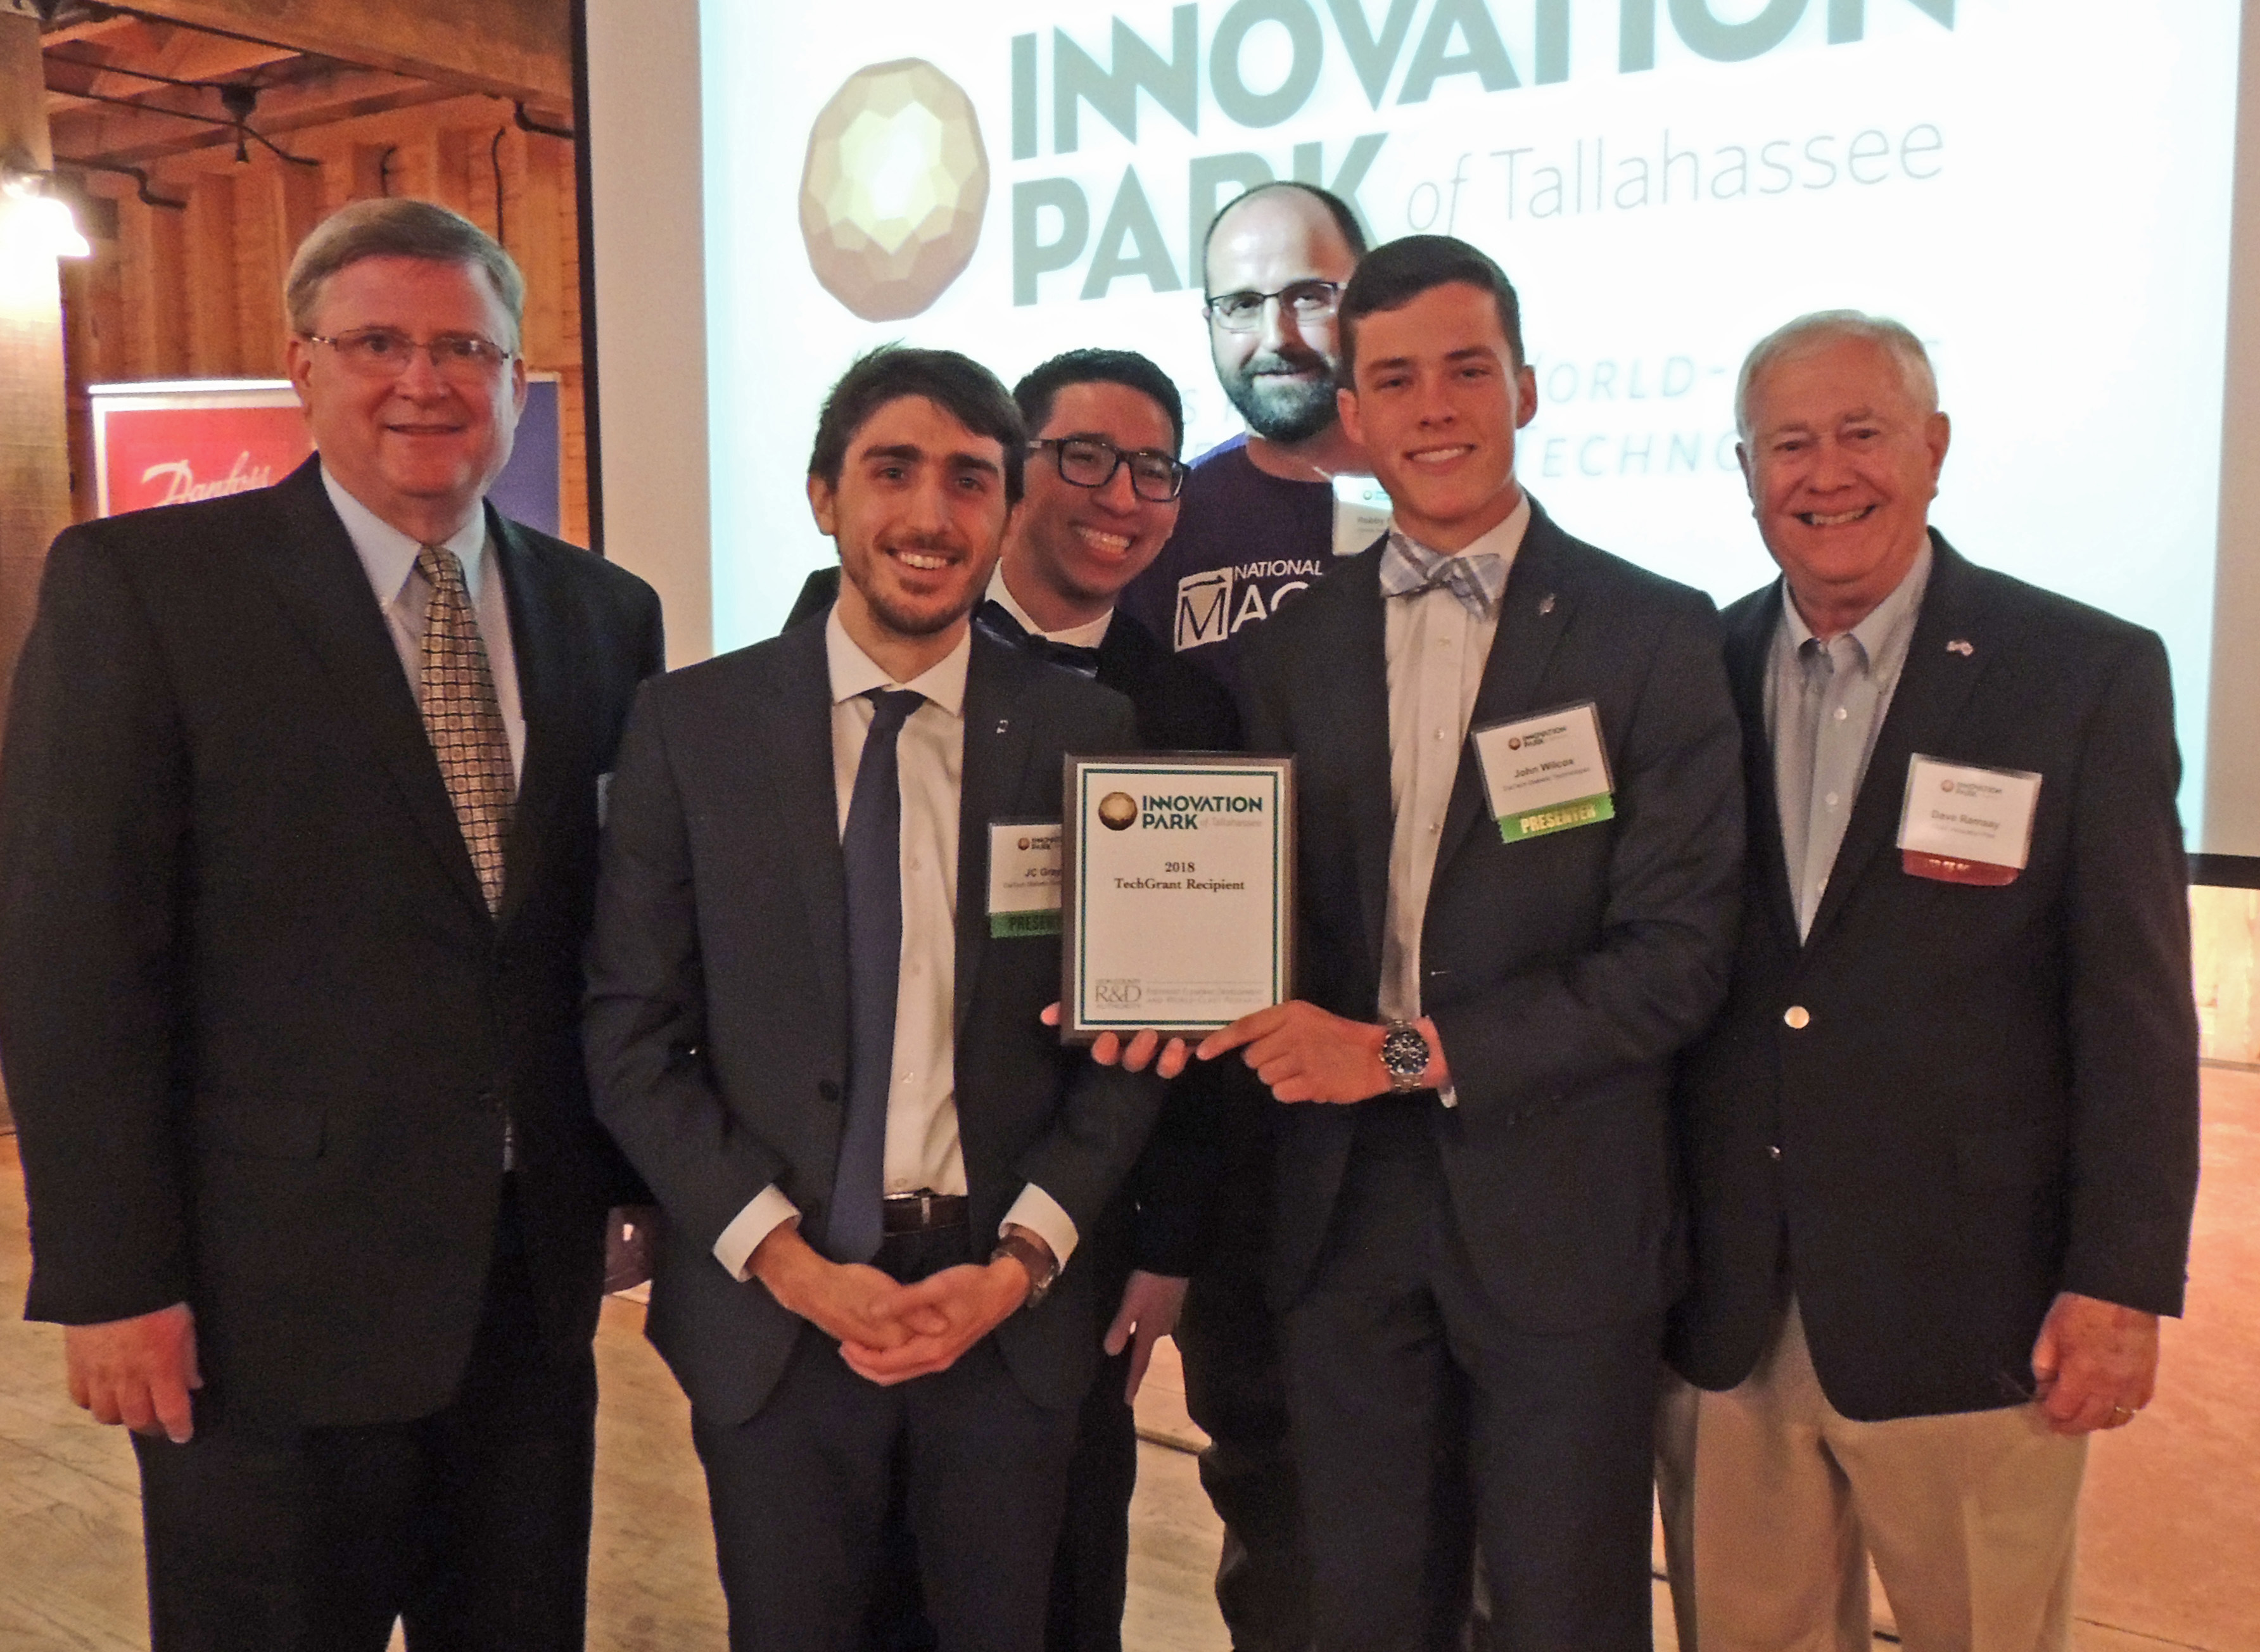 Diatech Diabetic Technologies Inc. was the winner of the 2018 Innovation Park TechGrant